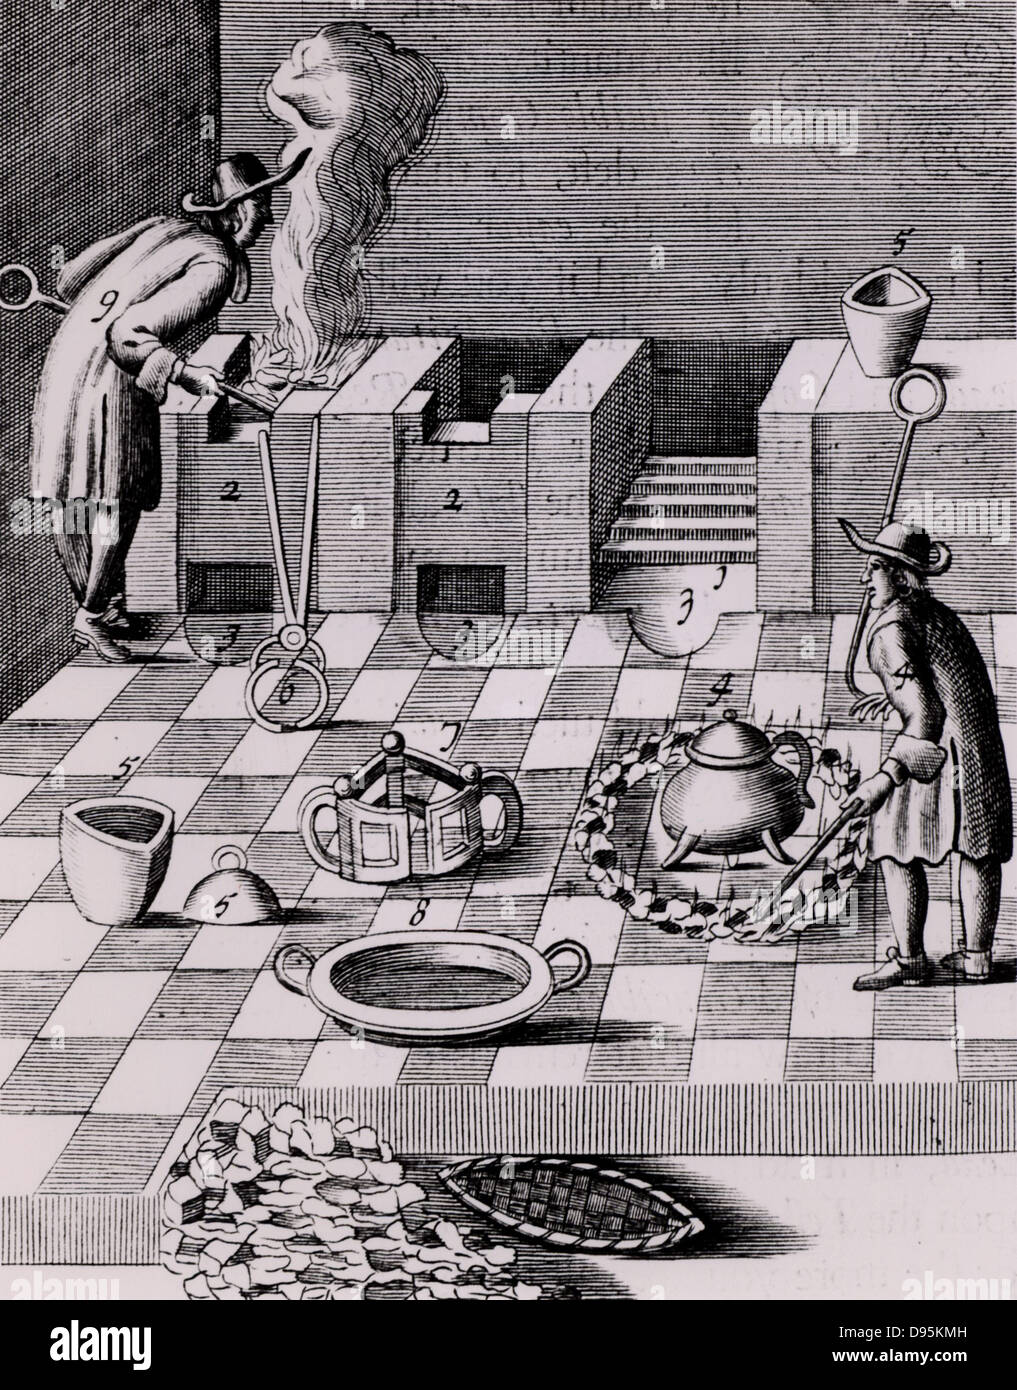 Refining gold: furnaces, 2,2, and operator, 9.  The man near 4 is gradually heating a crucible surrounded by a ring of burning coals: to increase the heat coals were be raked into a smaller circle. From 1683 English edition of Lazarus Ercker  'Beschreibung allerfurnemisten mineralischen Ertzt- und Berckwercksarten' originally published in Prague in 1574. Copperplate engraving. Stock Photo